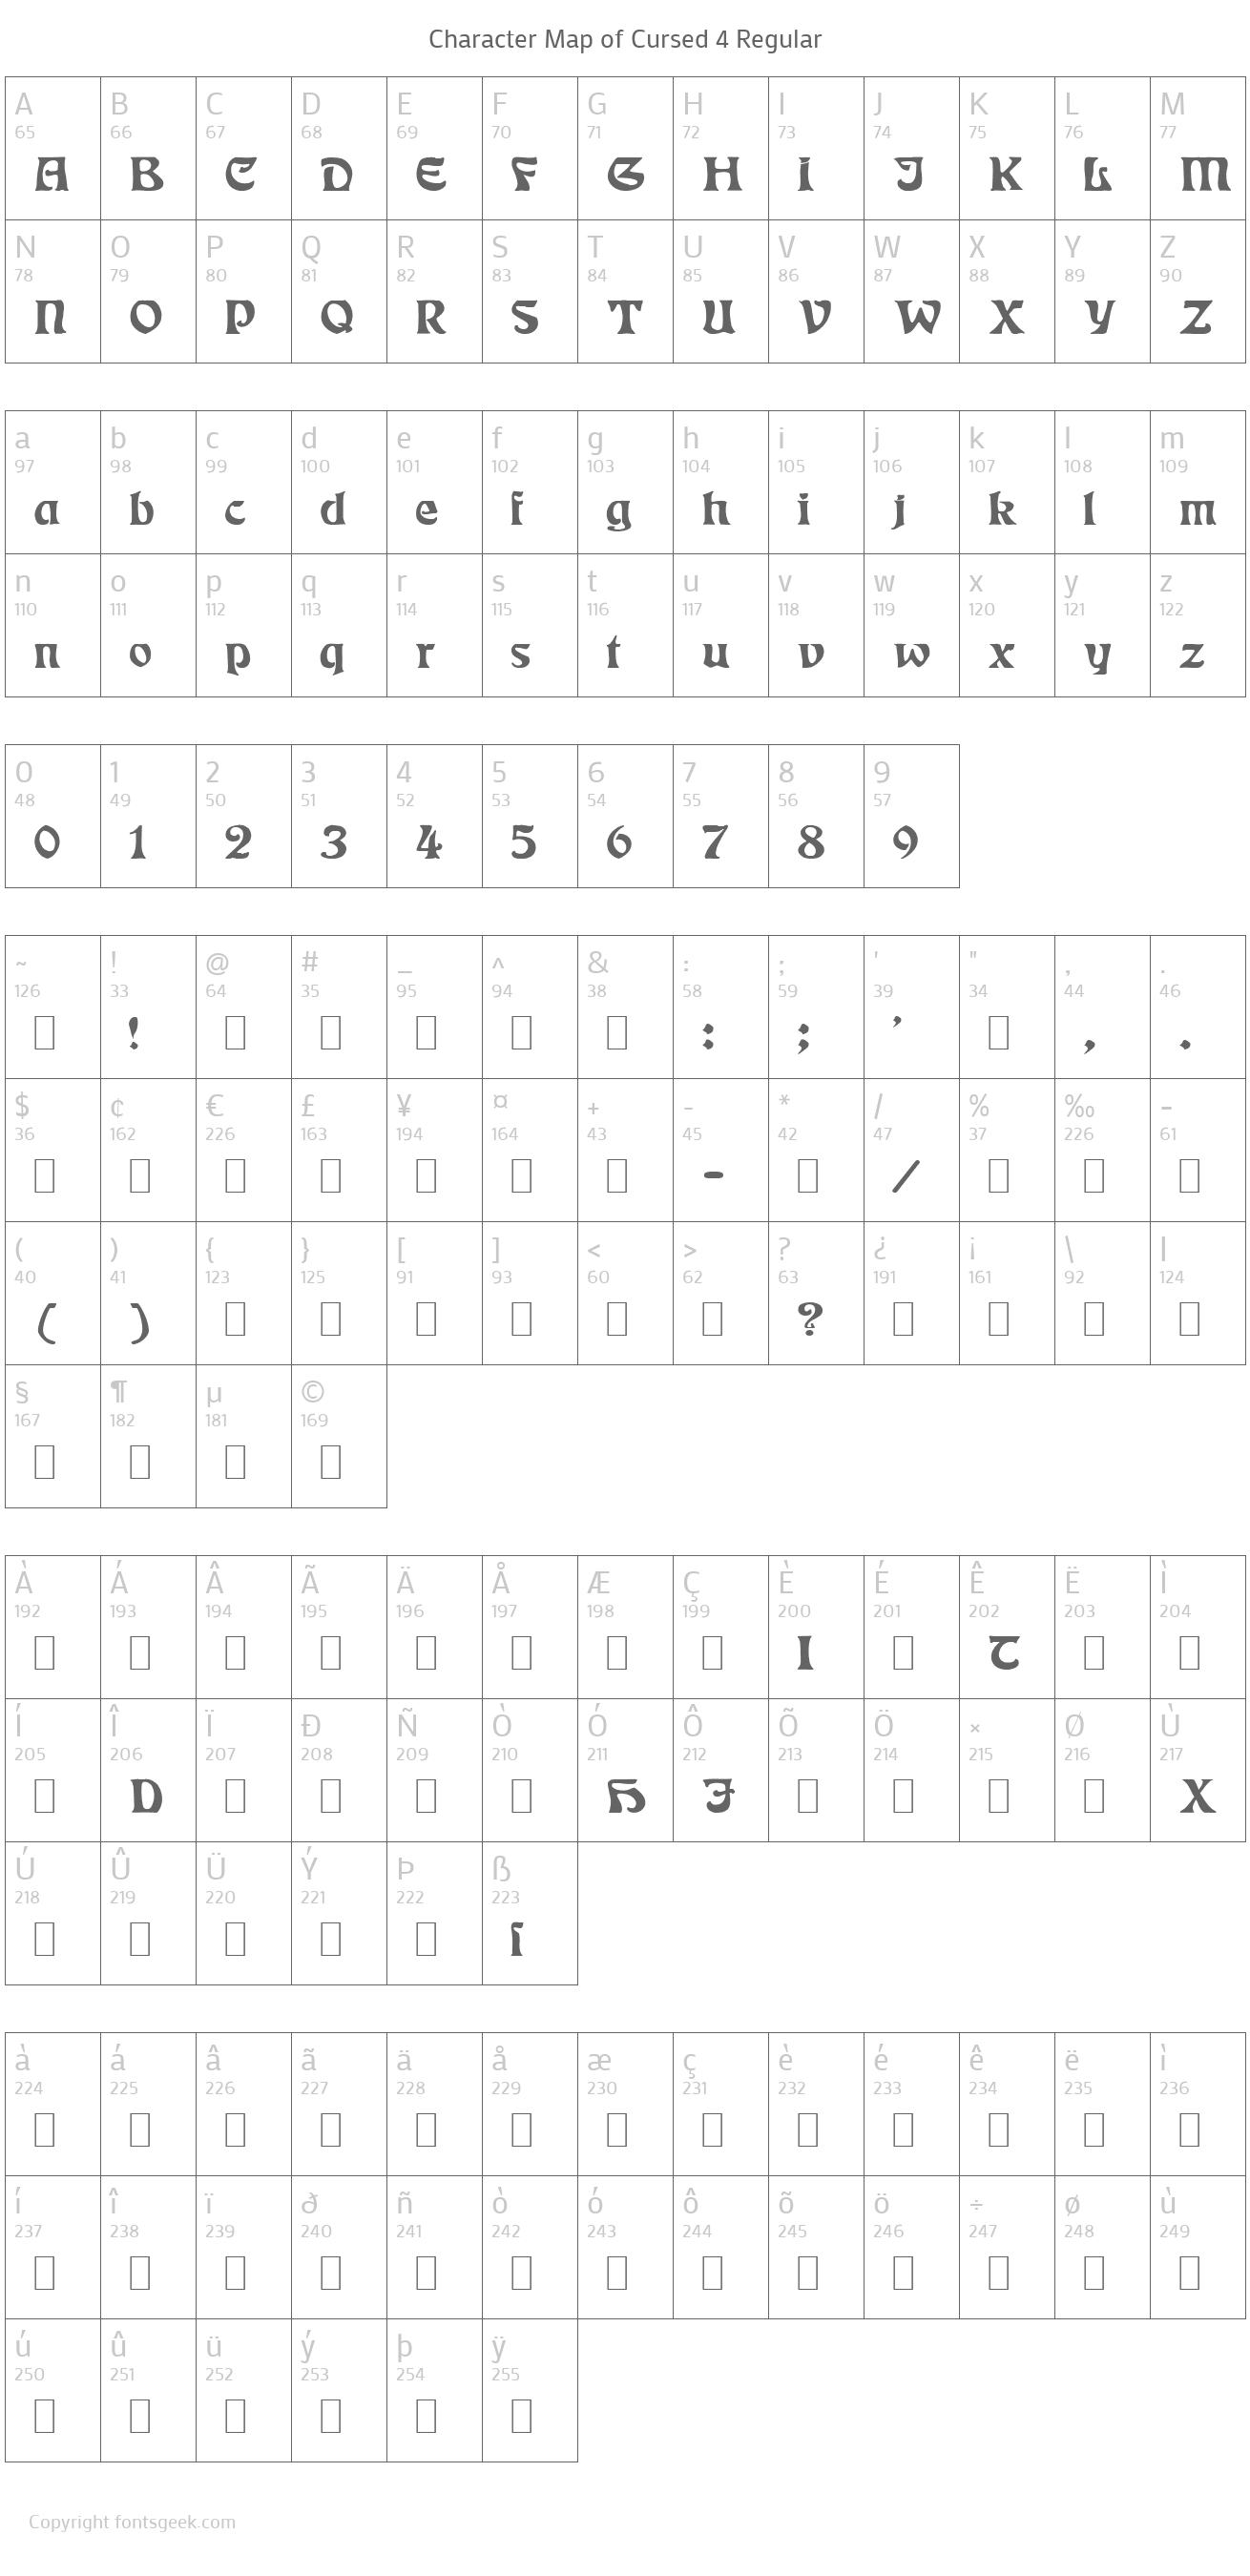 Cursed 4 Font : Download For Free, View Sample Text, Rating And More On Fontsgeek.Com